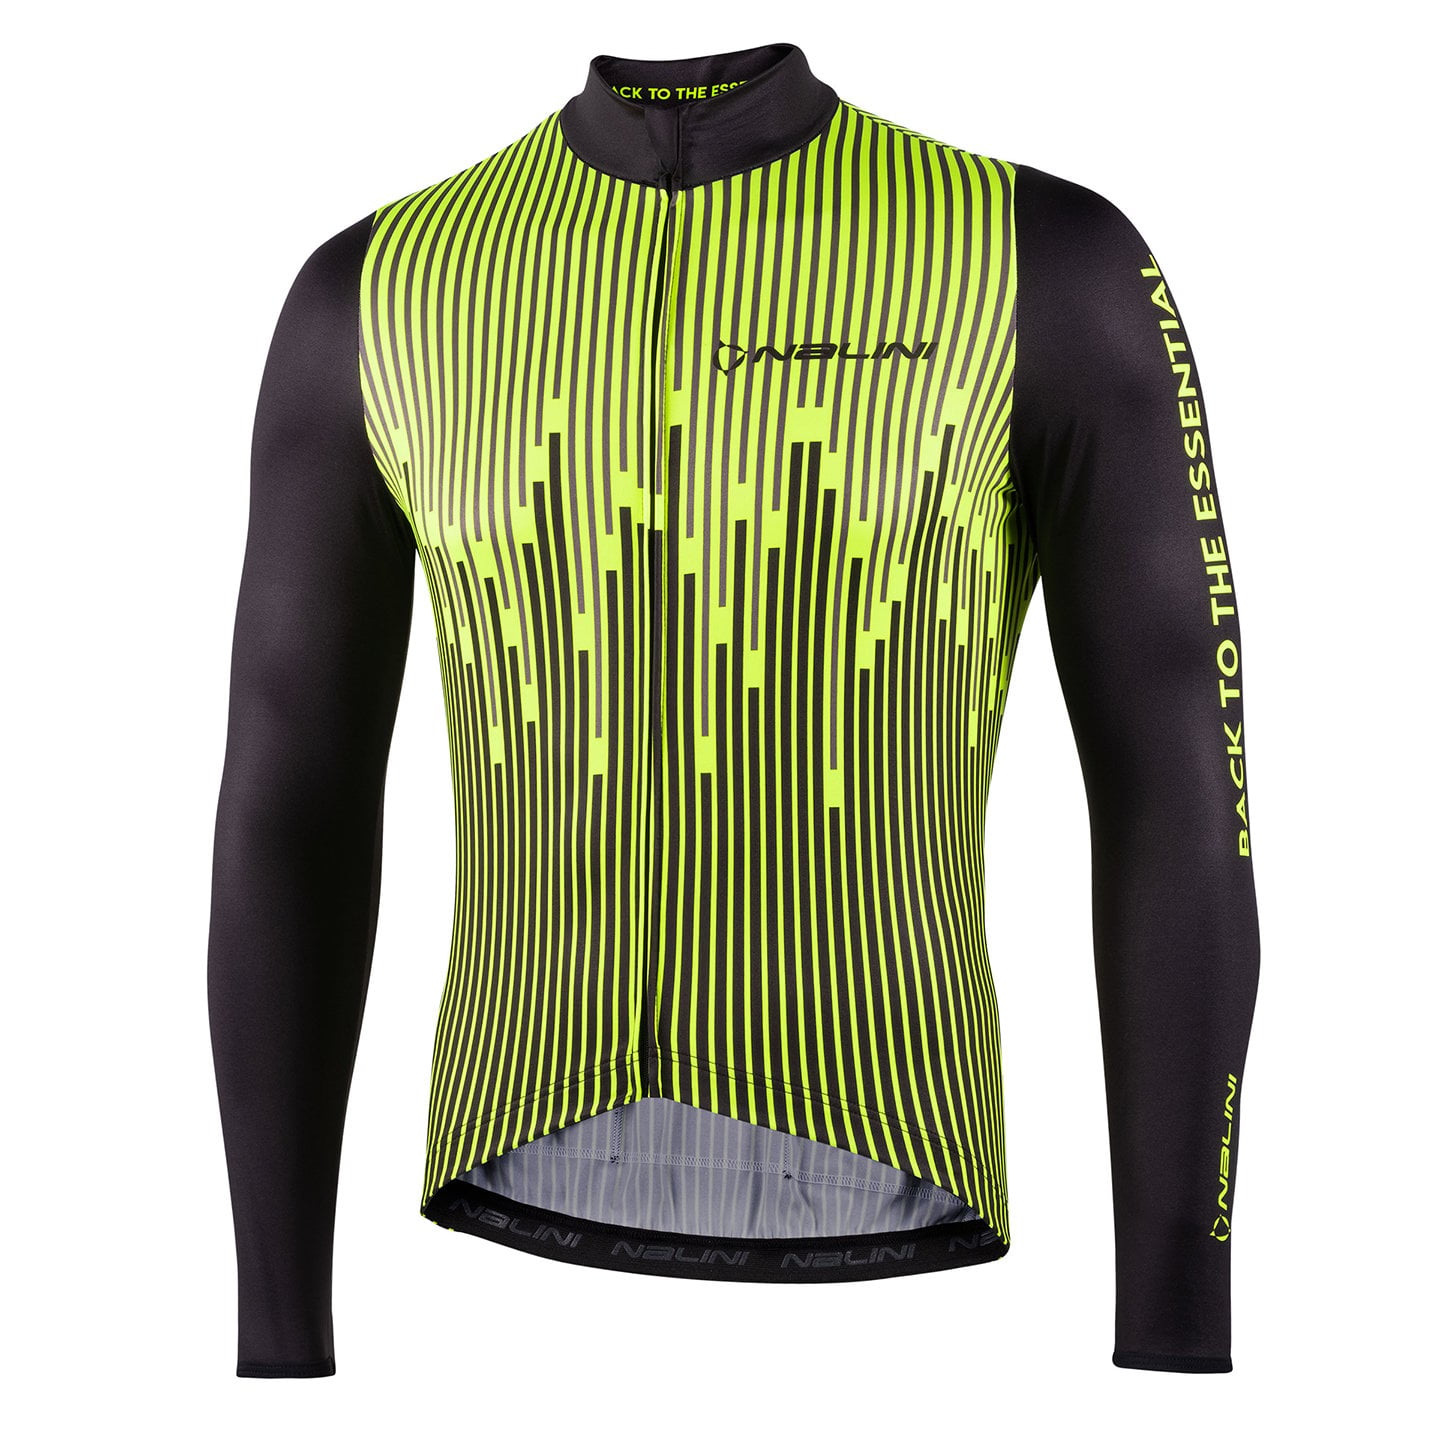 NALINI Fit Long Sleeve Jersey Long Sleeve Jersey, for men, size XL, Cycling jersey, Cycle clothing